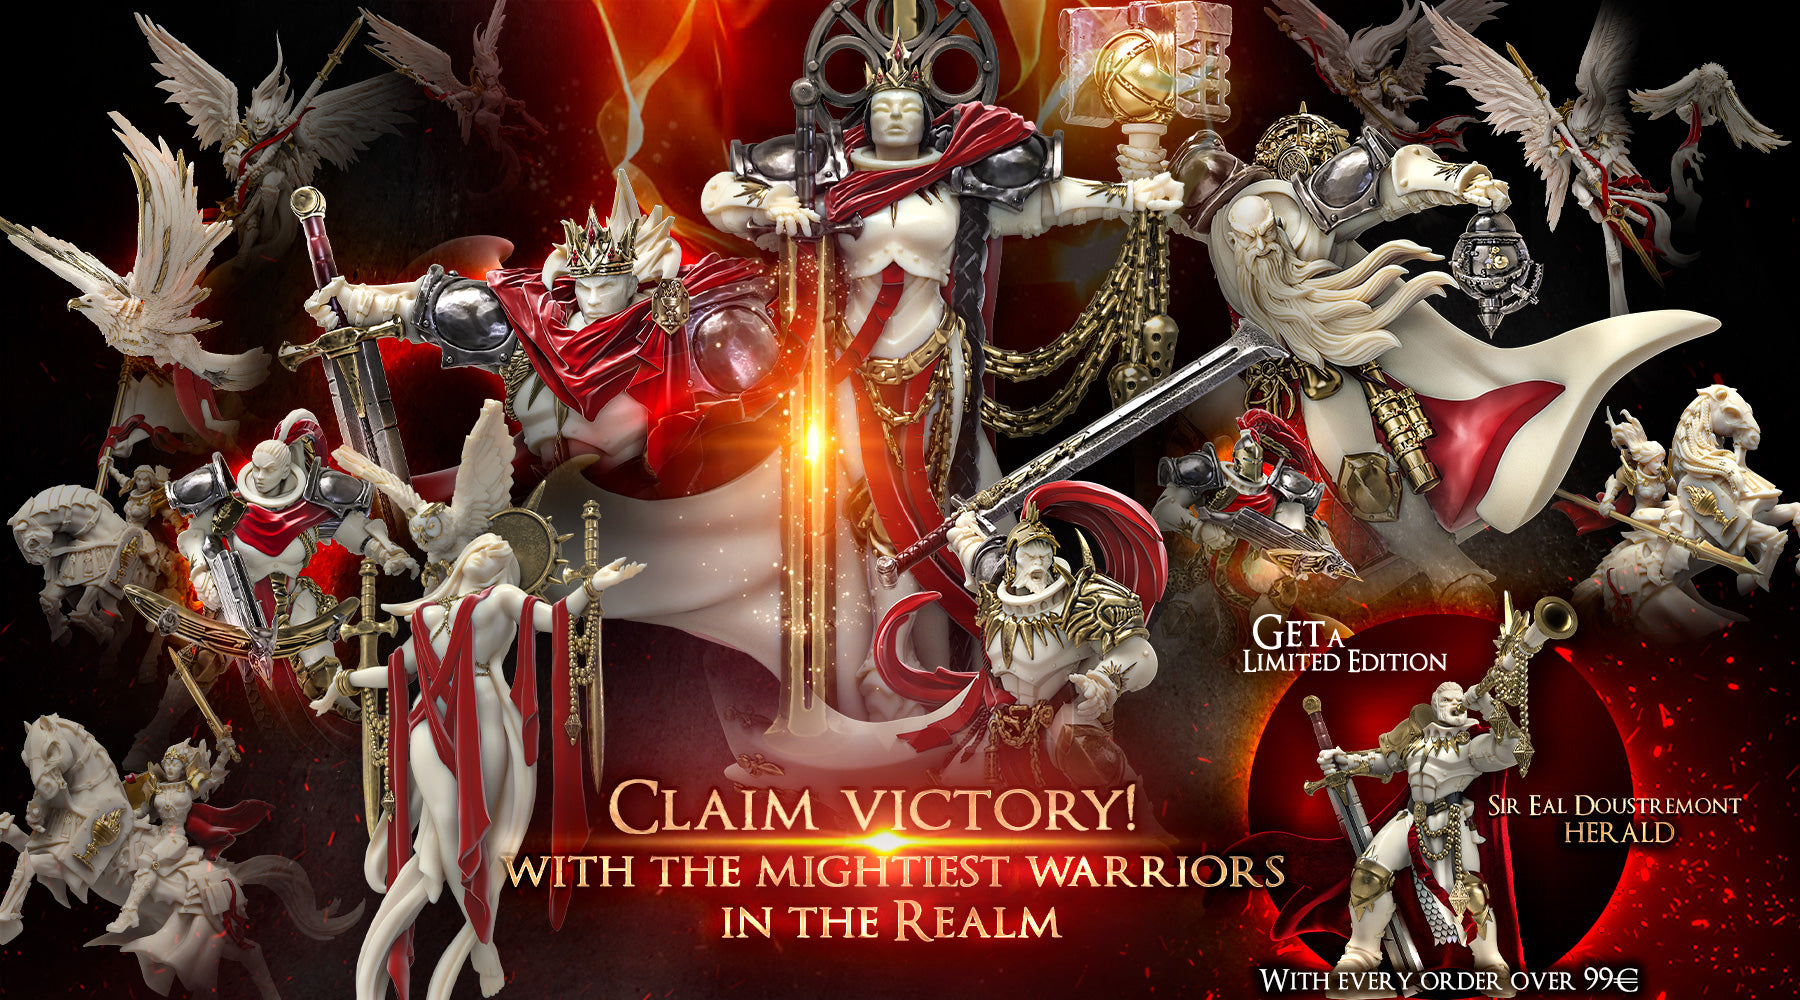 Claim victory with the Mightiest warriors in the Realm!